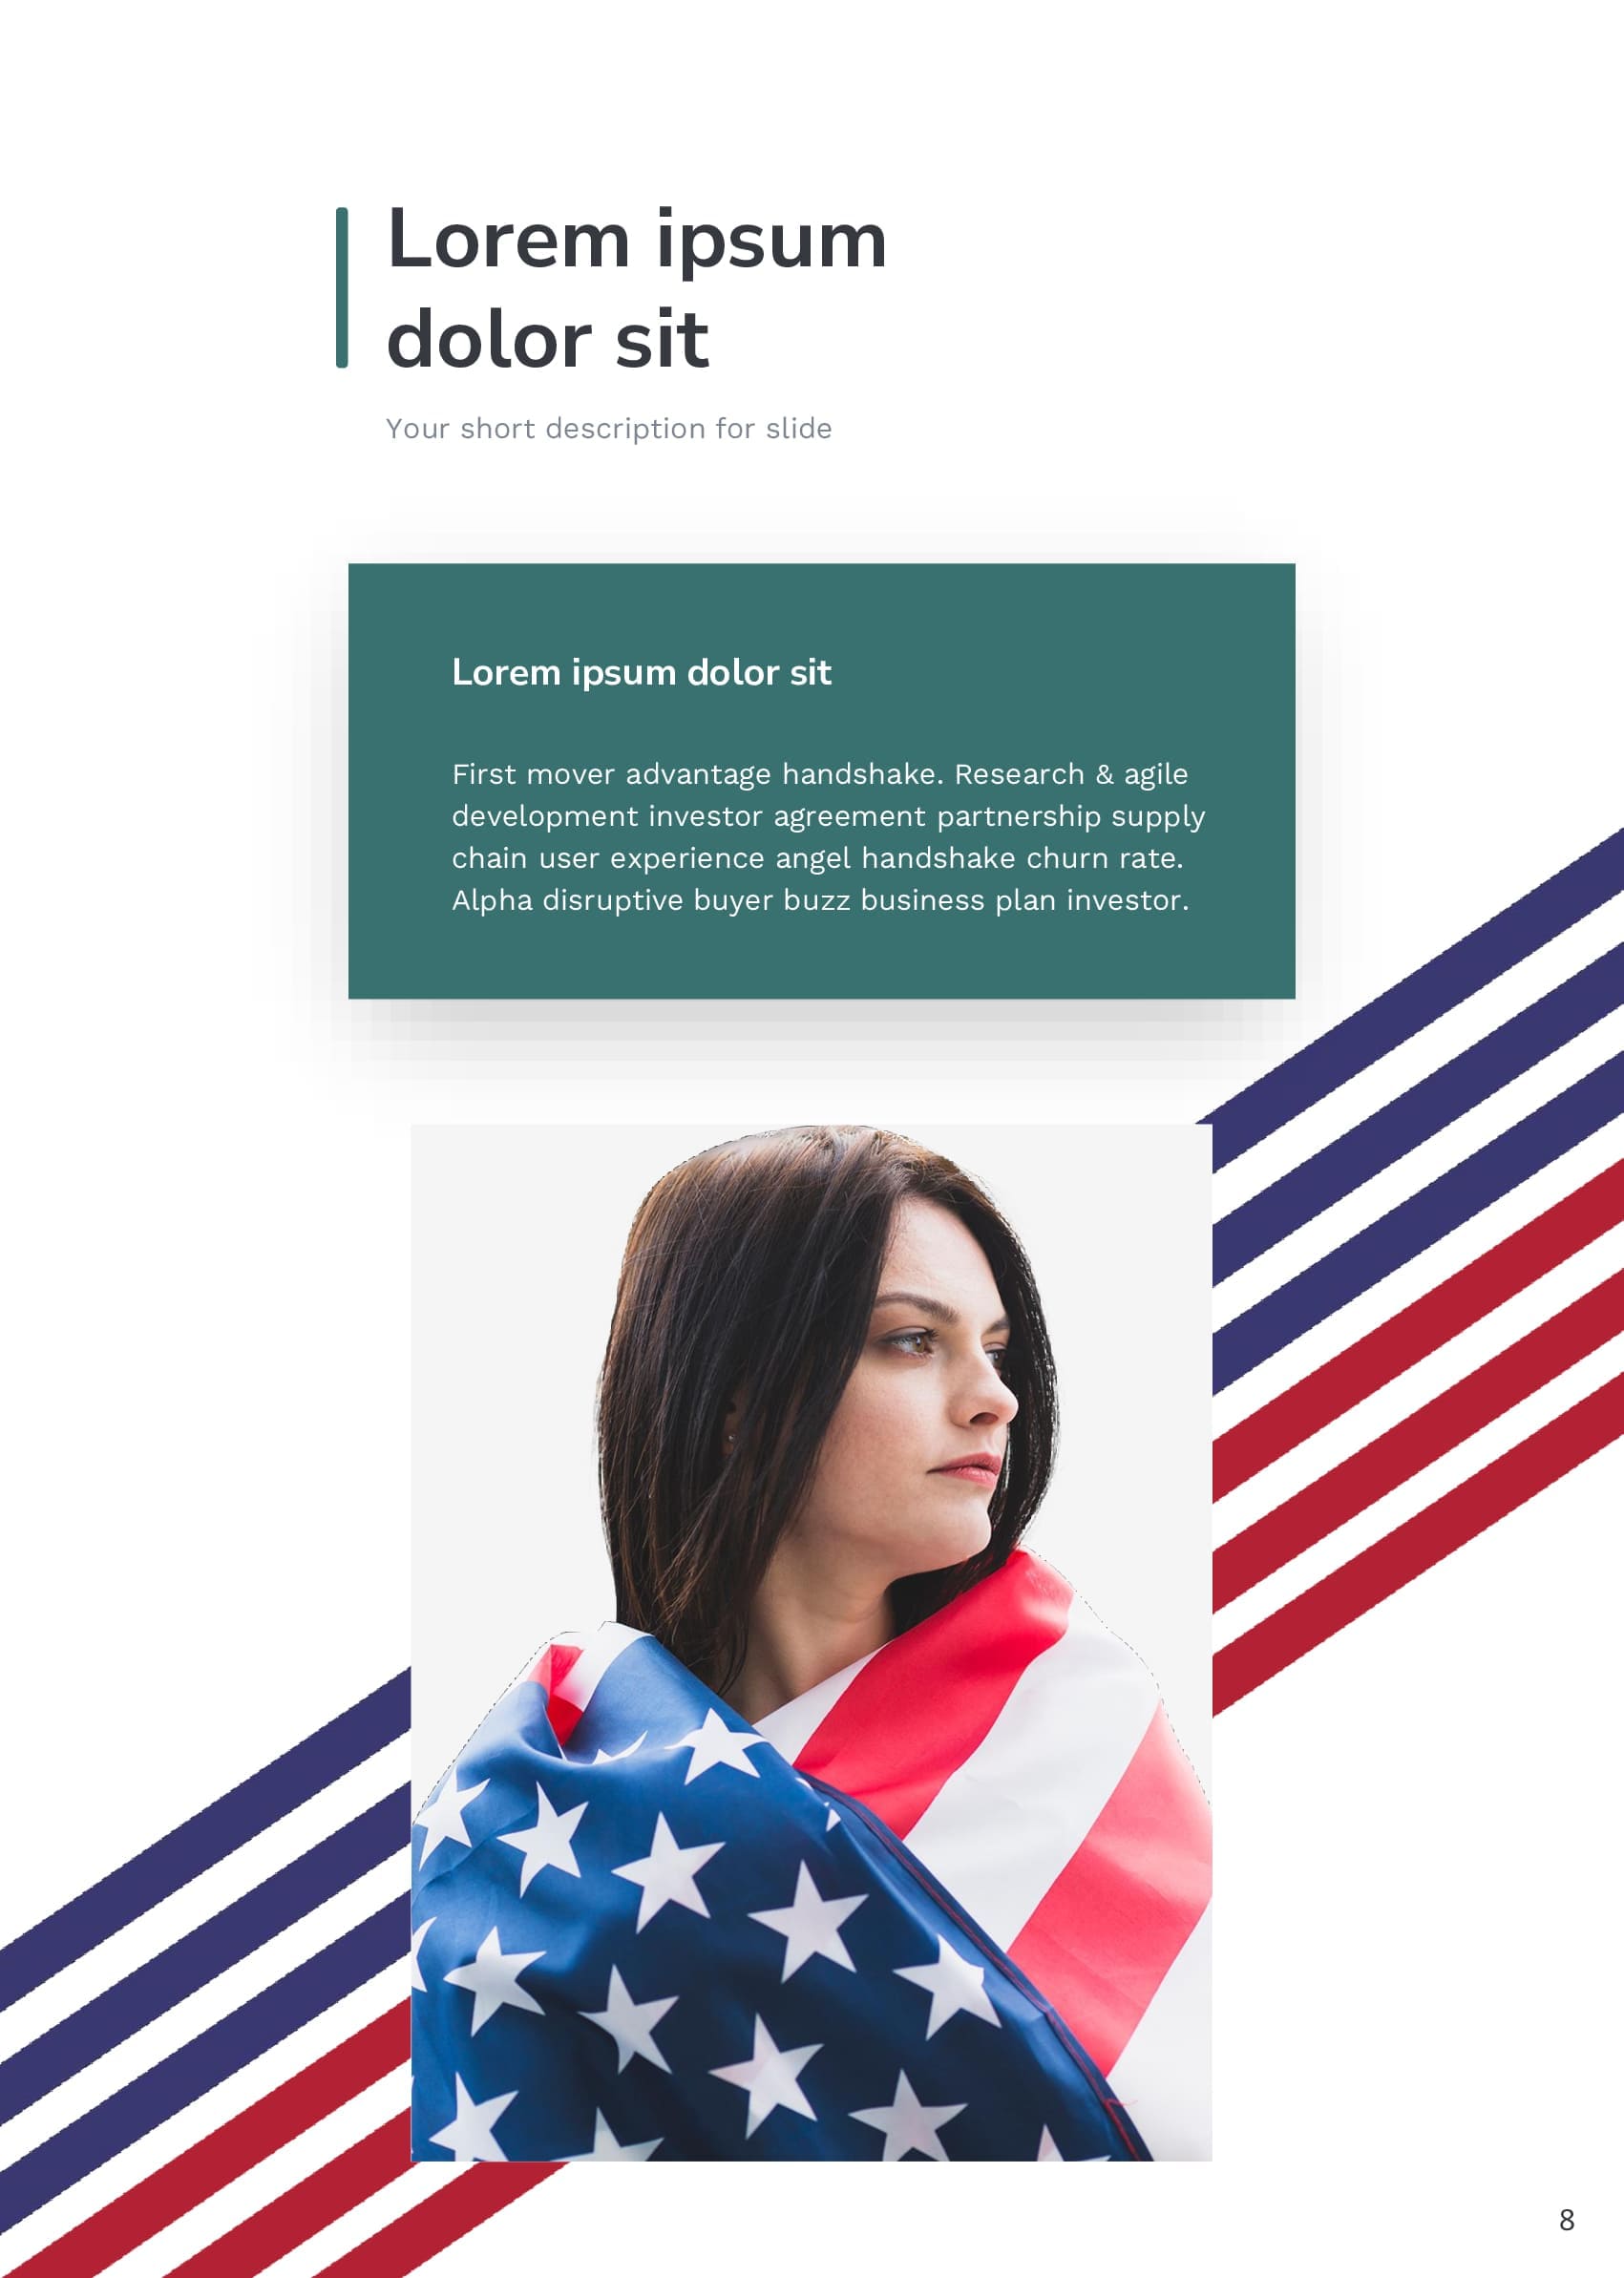 The girl is wrapped in an American flag and with a short description.